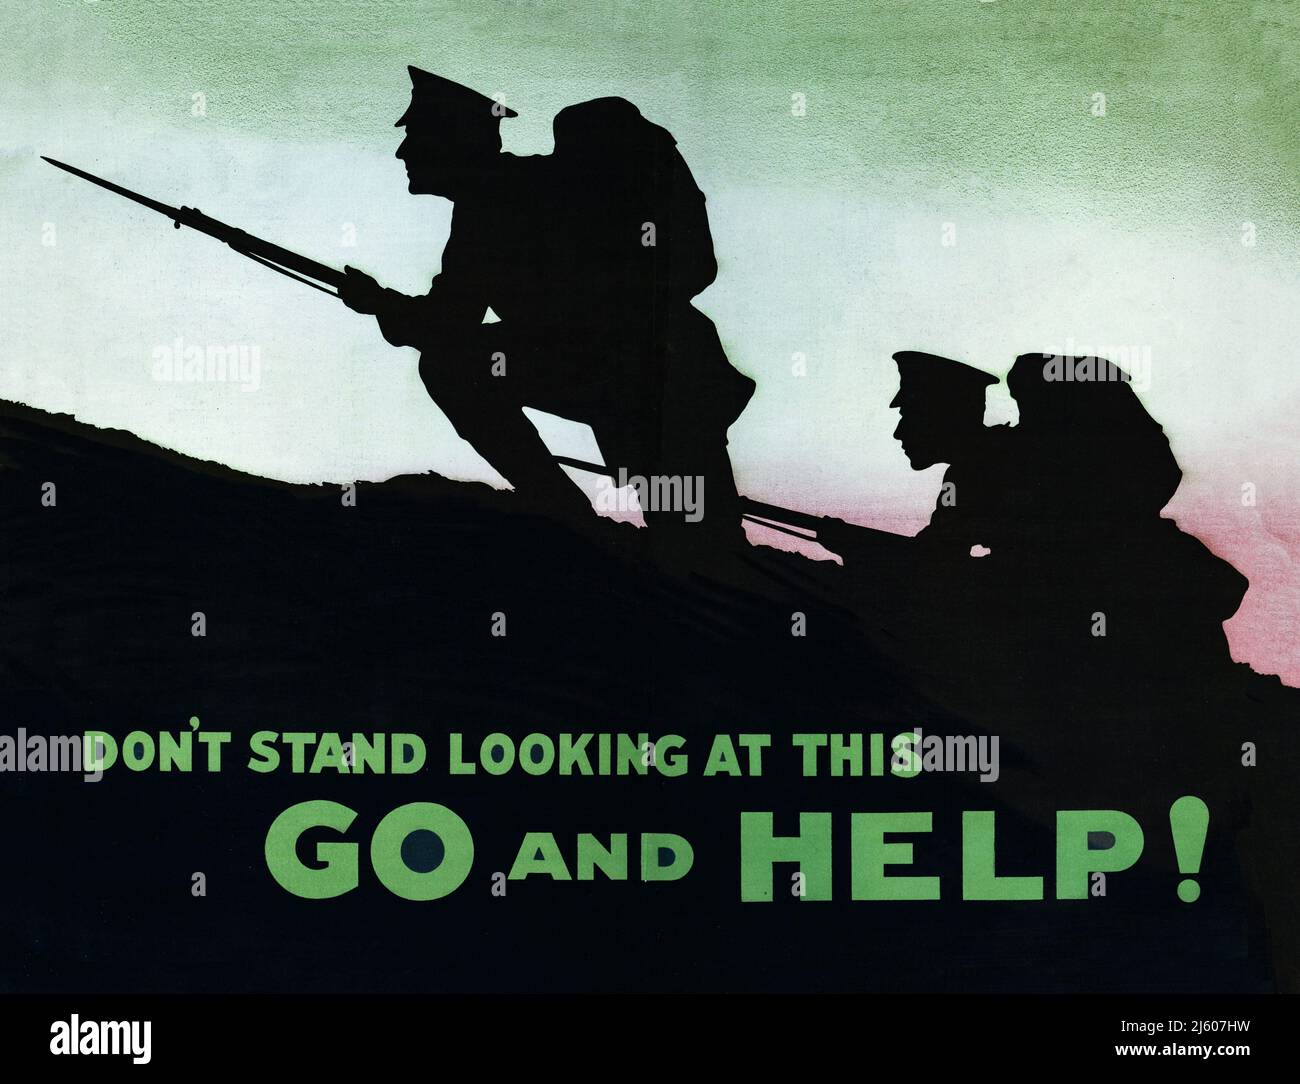 British advertising recruitment poster from 1915, with two soldiers bearing bayonets at the crest of a hill, in silhouette. The slogan is don't stand looking at this, go and help!  Artist Unknown. A modified version of this available at Alamy number 2J607MX Stock Photo